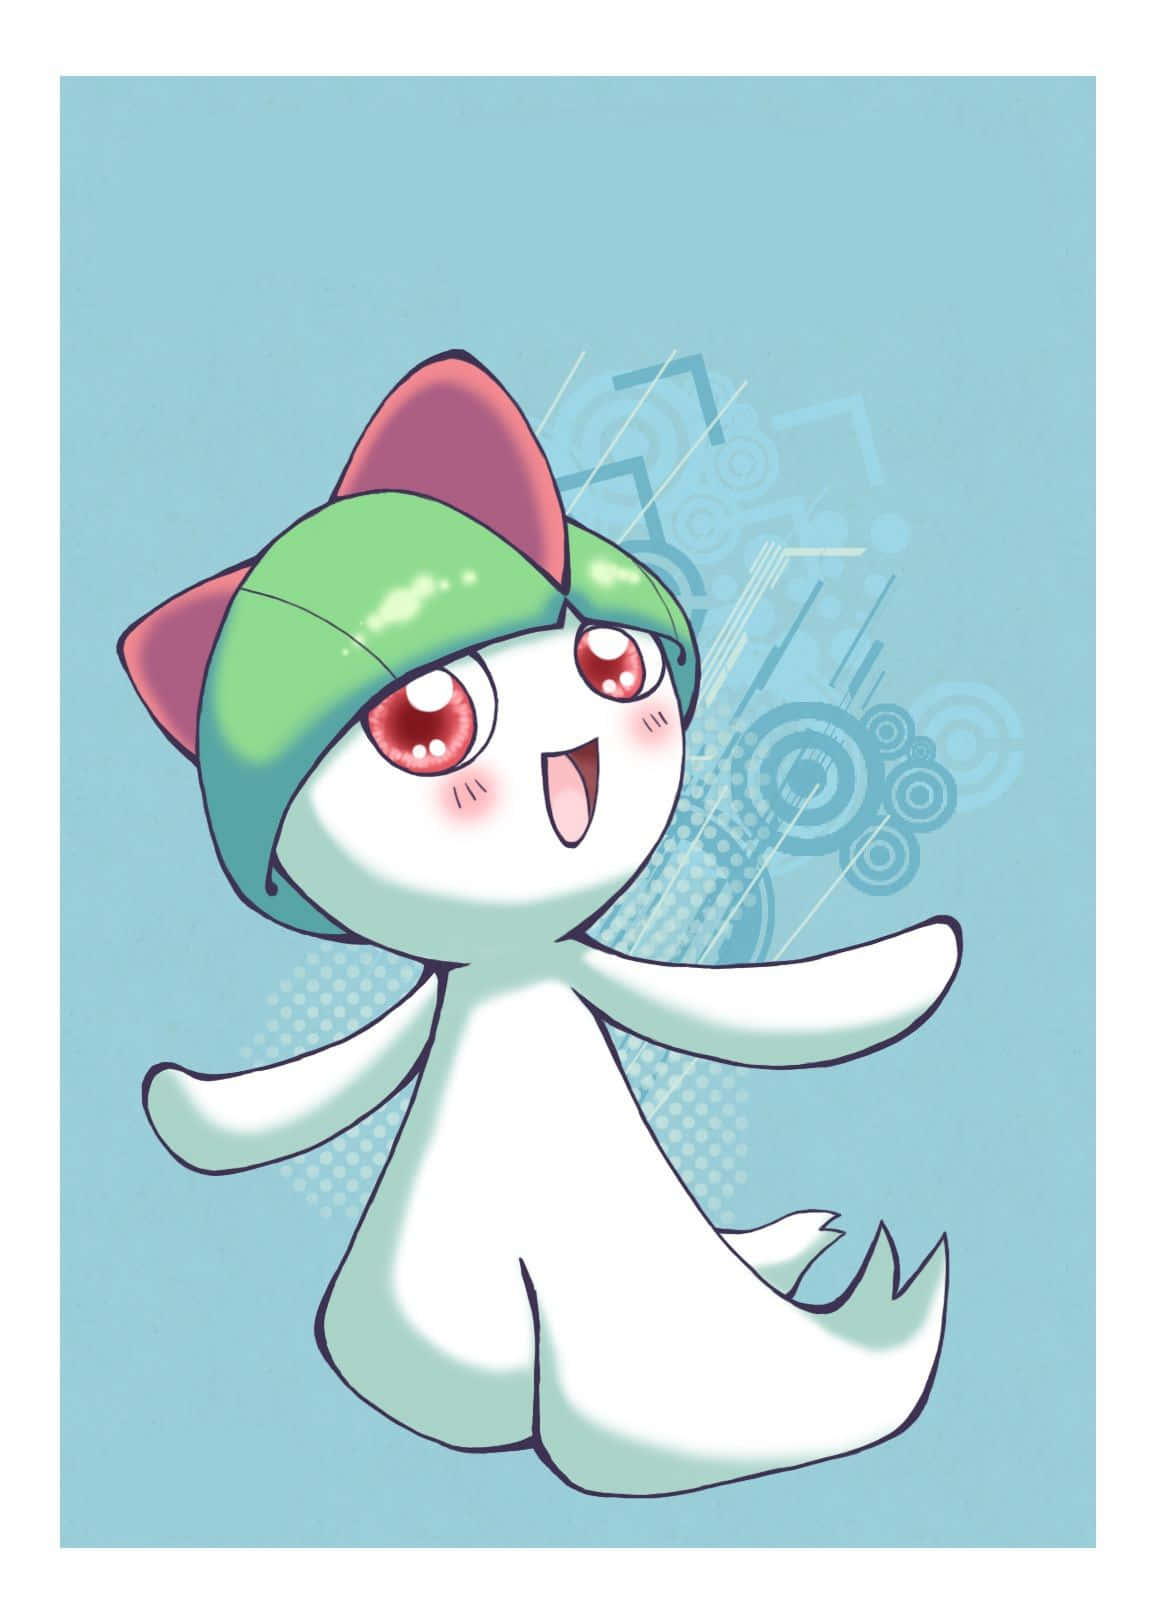 Ralts With Big Red Eyes Wallpaper